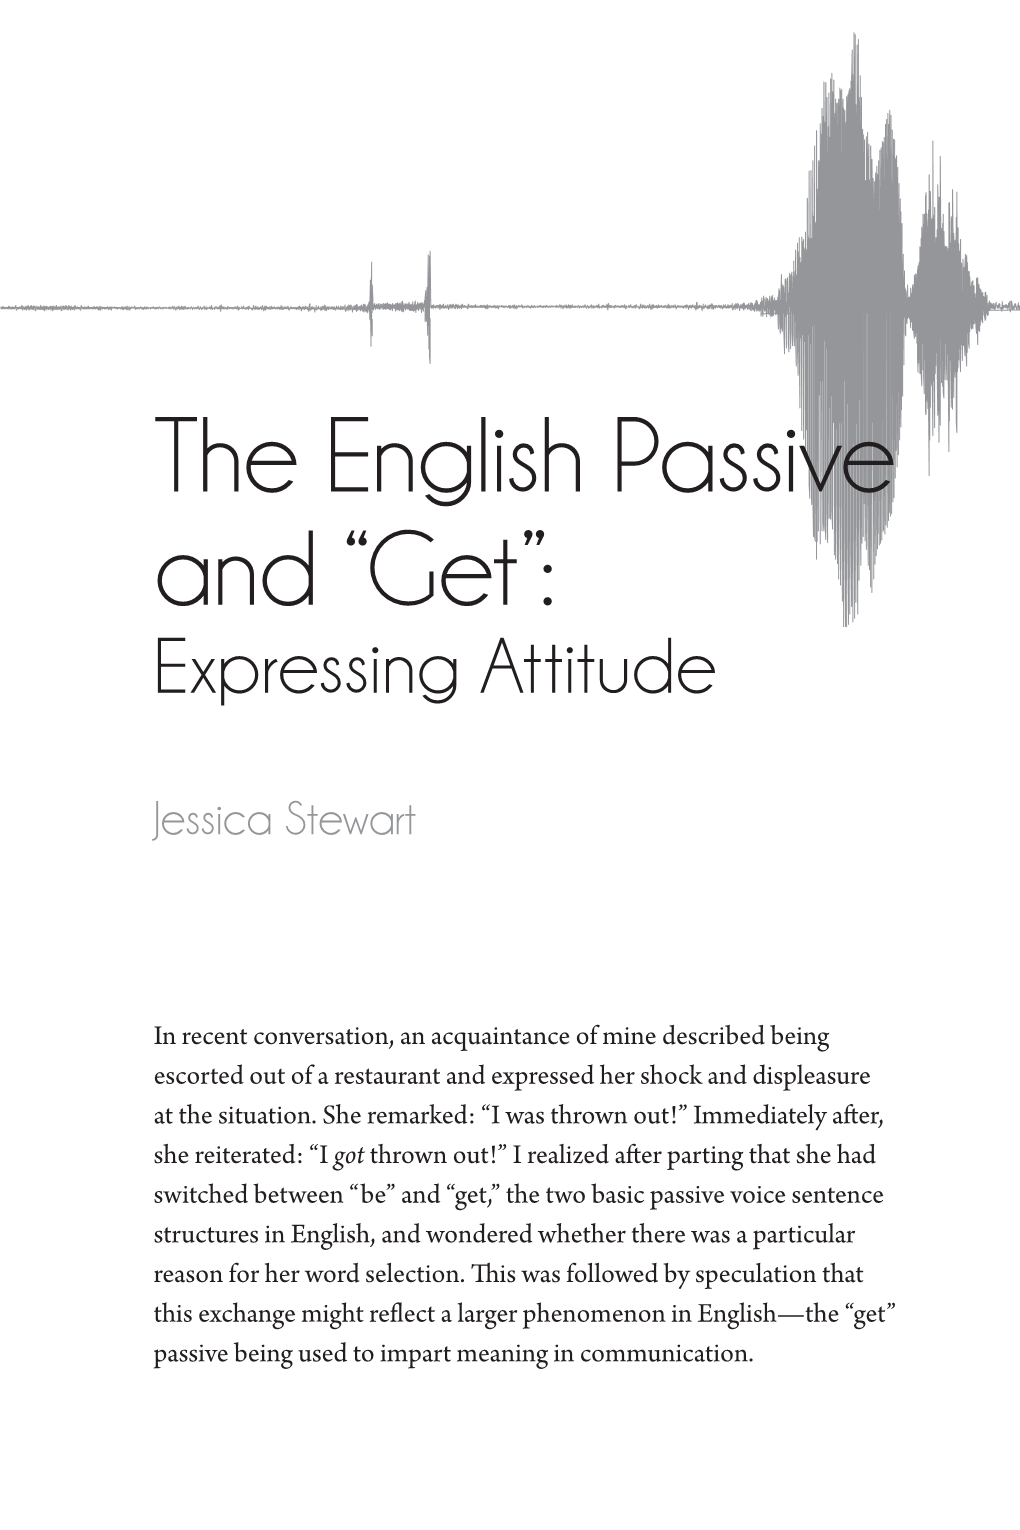 The English Passive and “Get”: Expressing Attitude